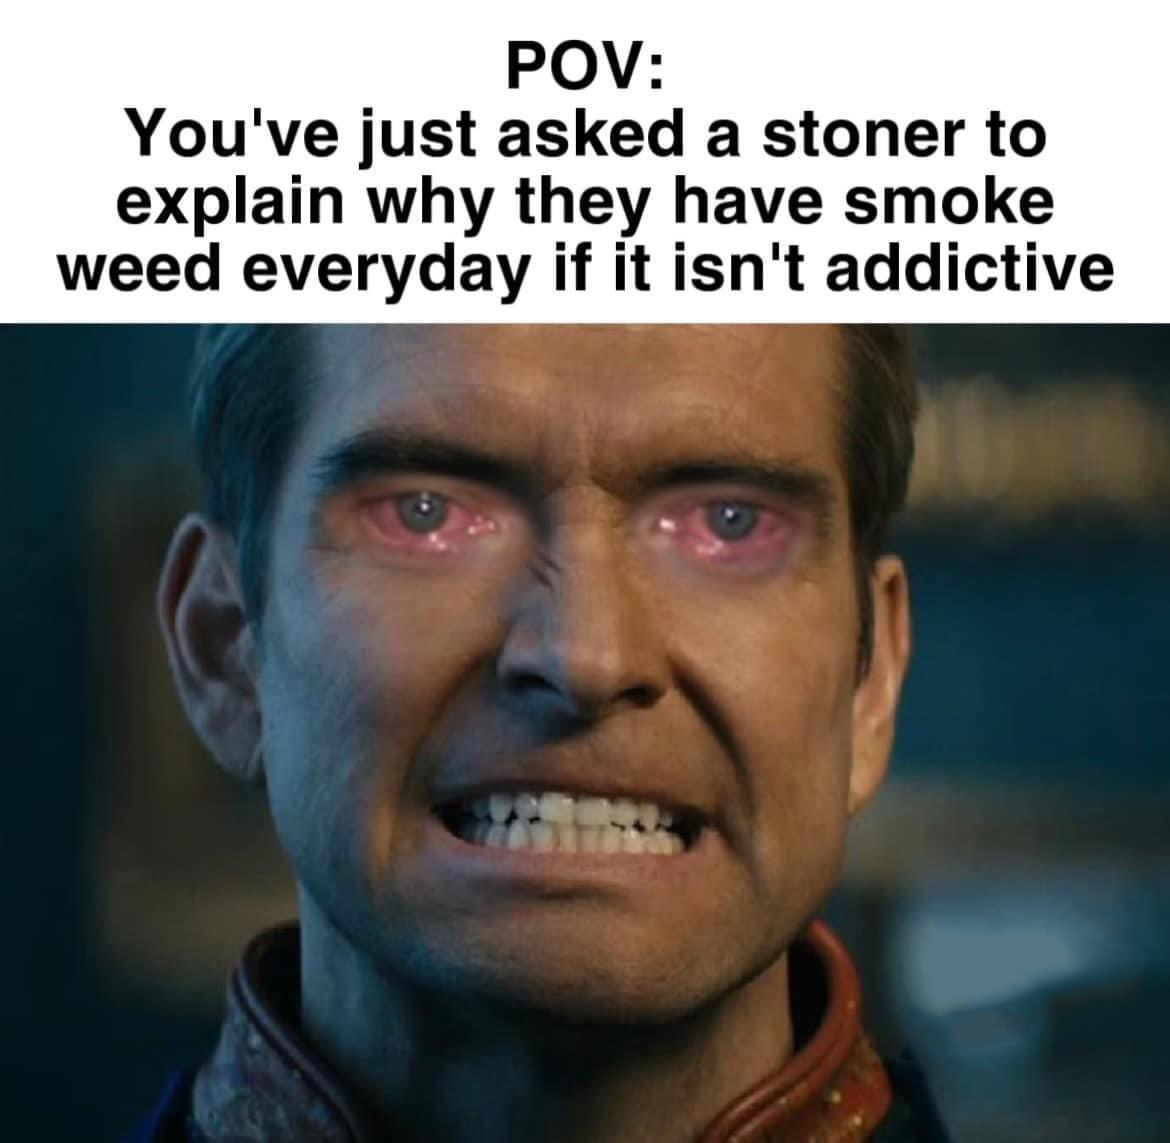 monday morning randomness - homelander angry - Pov You've just asked a stoner to explain why they have smoke weed everyday if it isn't addictive